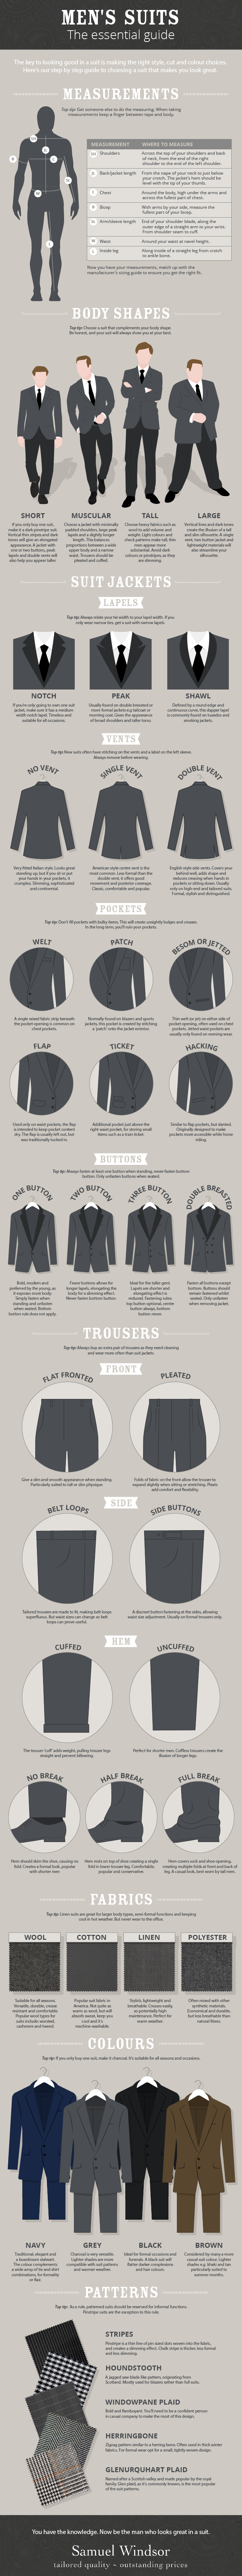 Mens Suits - The Essential Guide